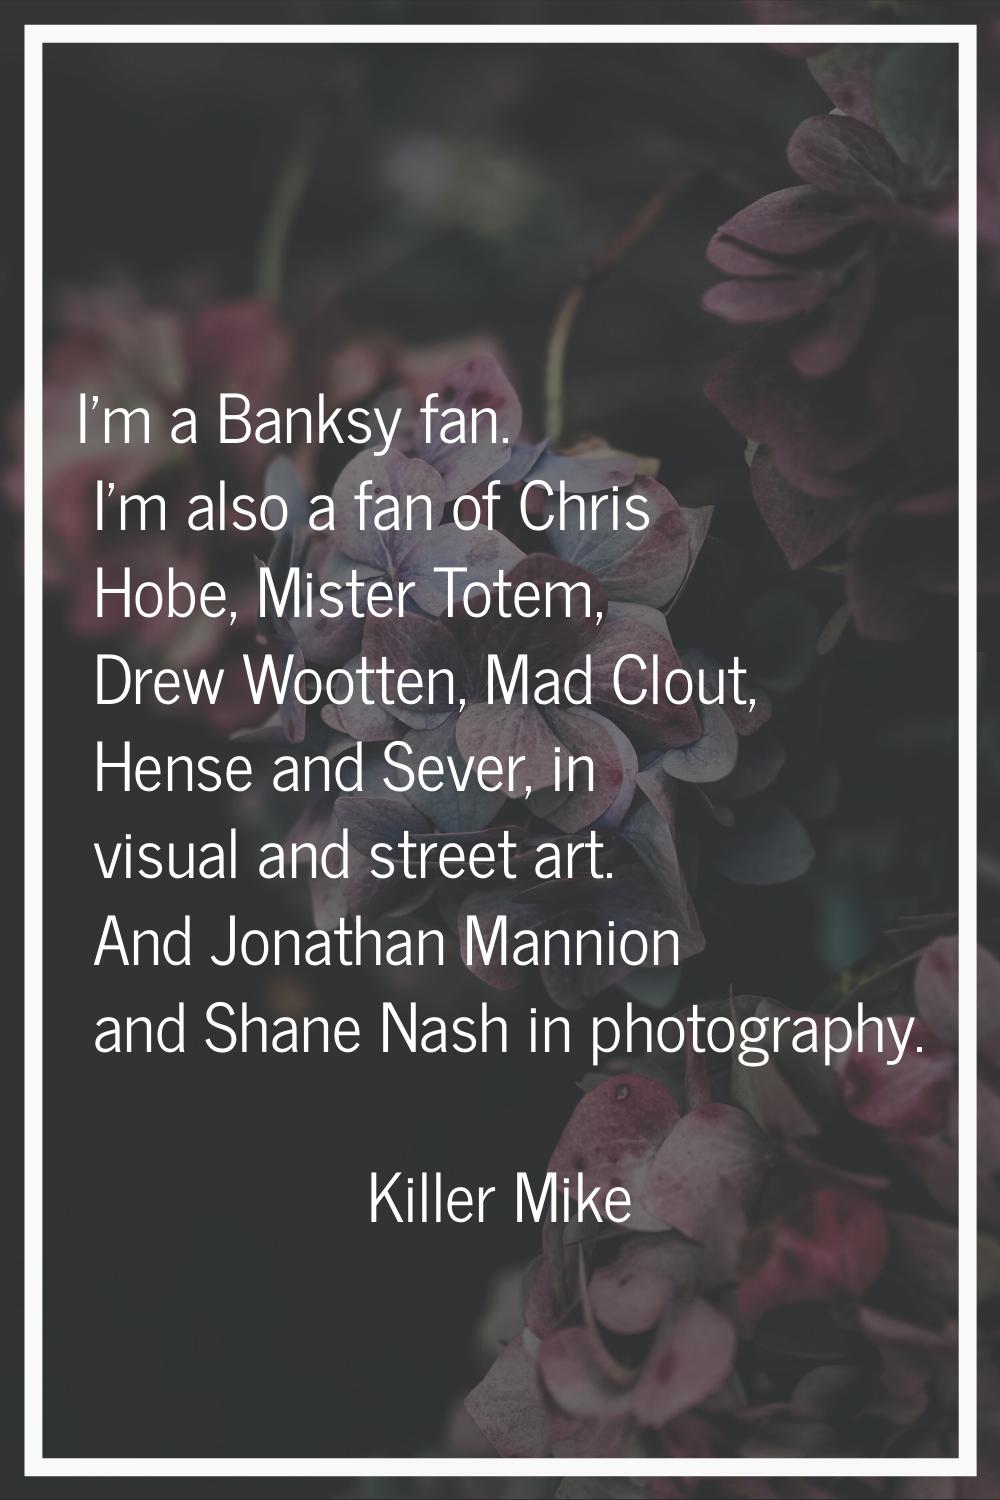 I'm a Banksy fan. I'm also a fan of Chris Hobe, Mister Totem, Drew Wootten, Mad Clout, Hense and Se